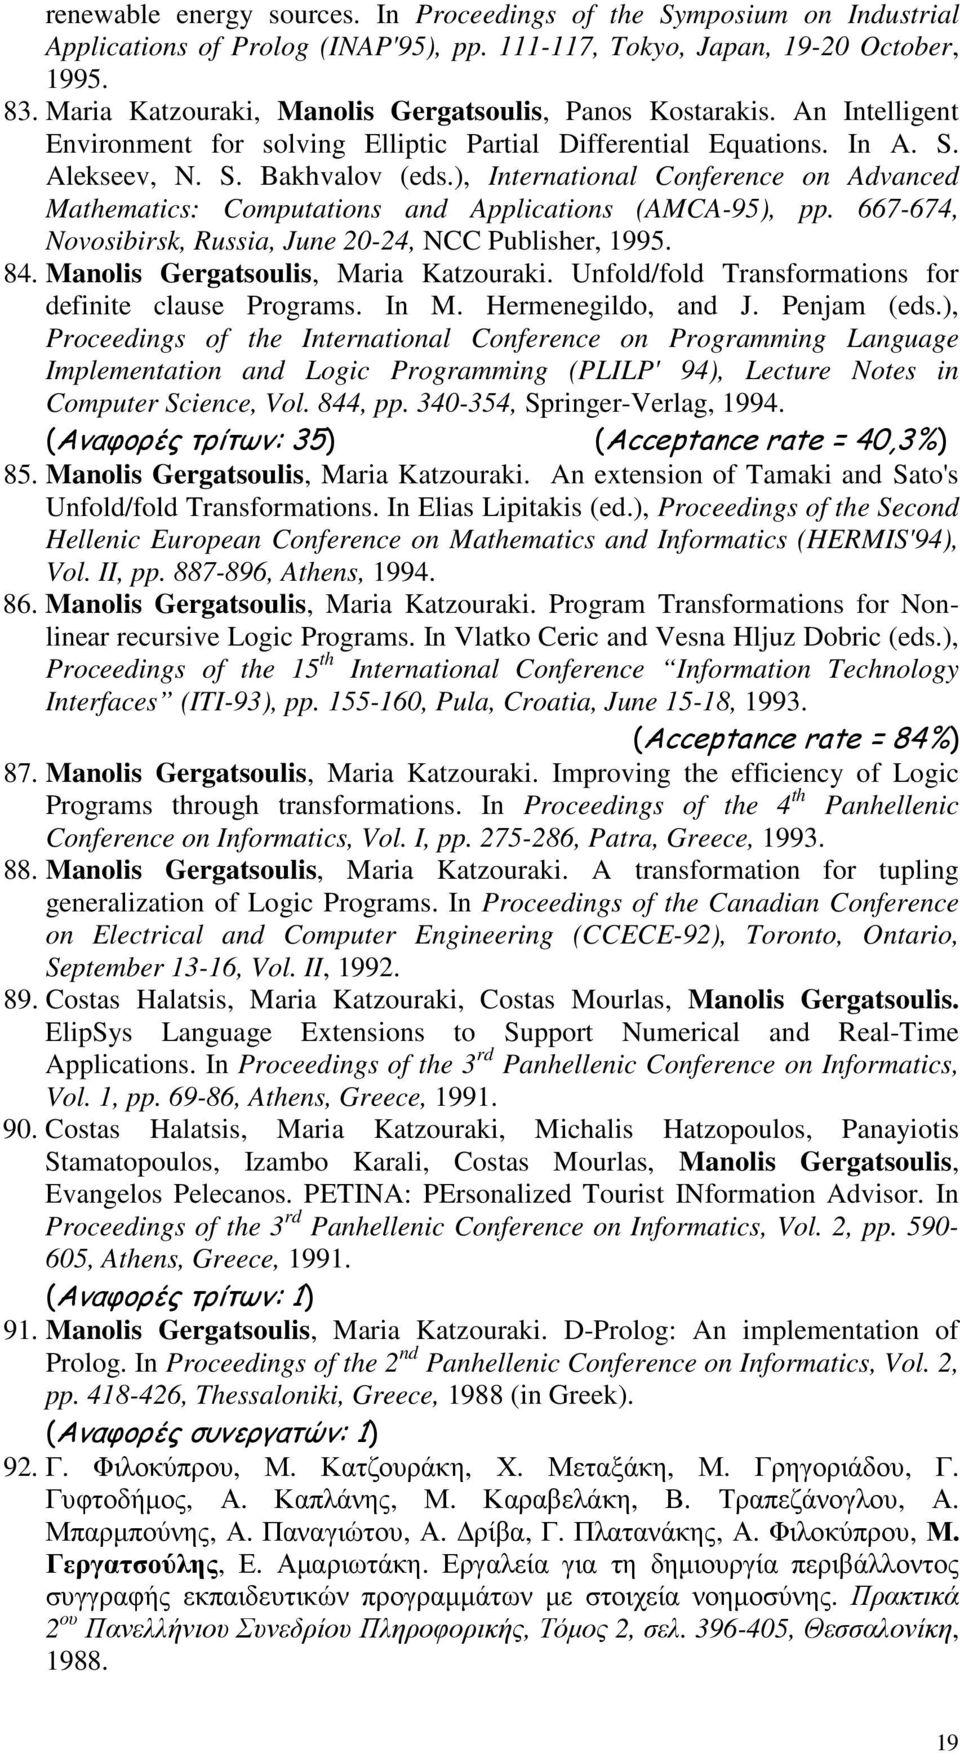 ), International Conference on Advanced Mathematics: Computations and Applications (AMCA-95), pp. 667-674, Novosibirsk, Russia, June 20-24, NCC Publisher, 1995. 84.